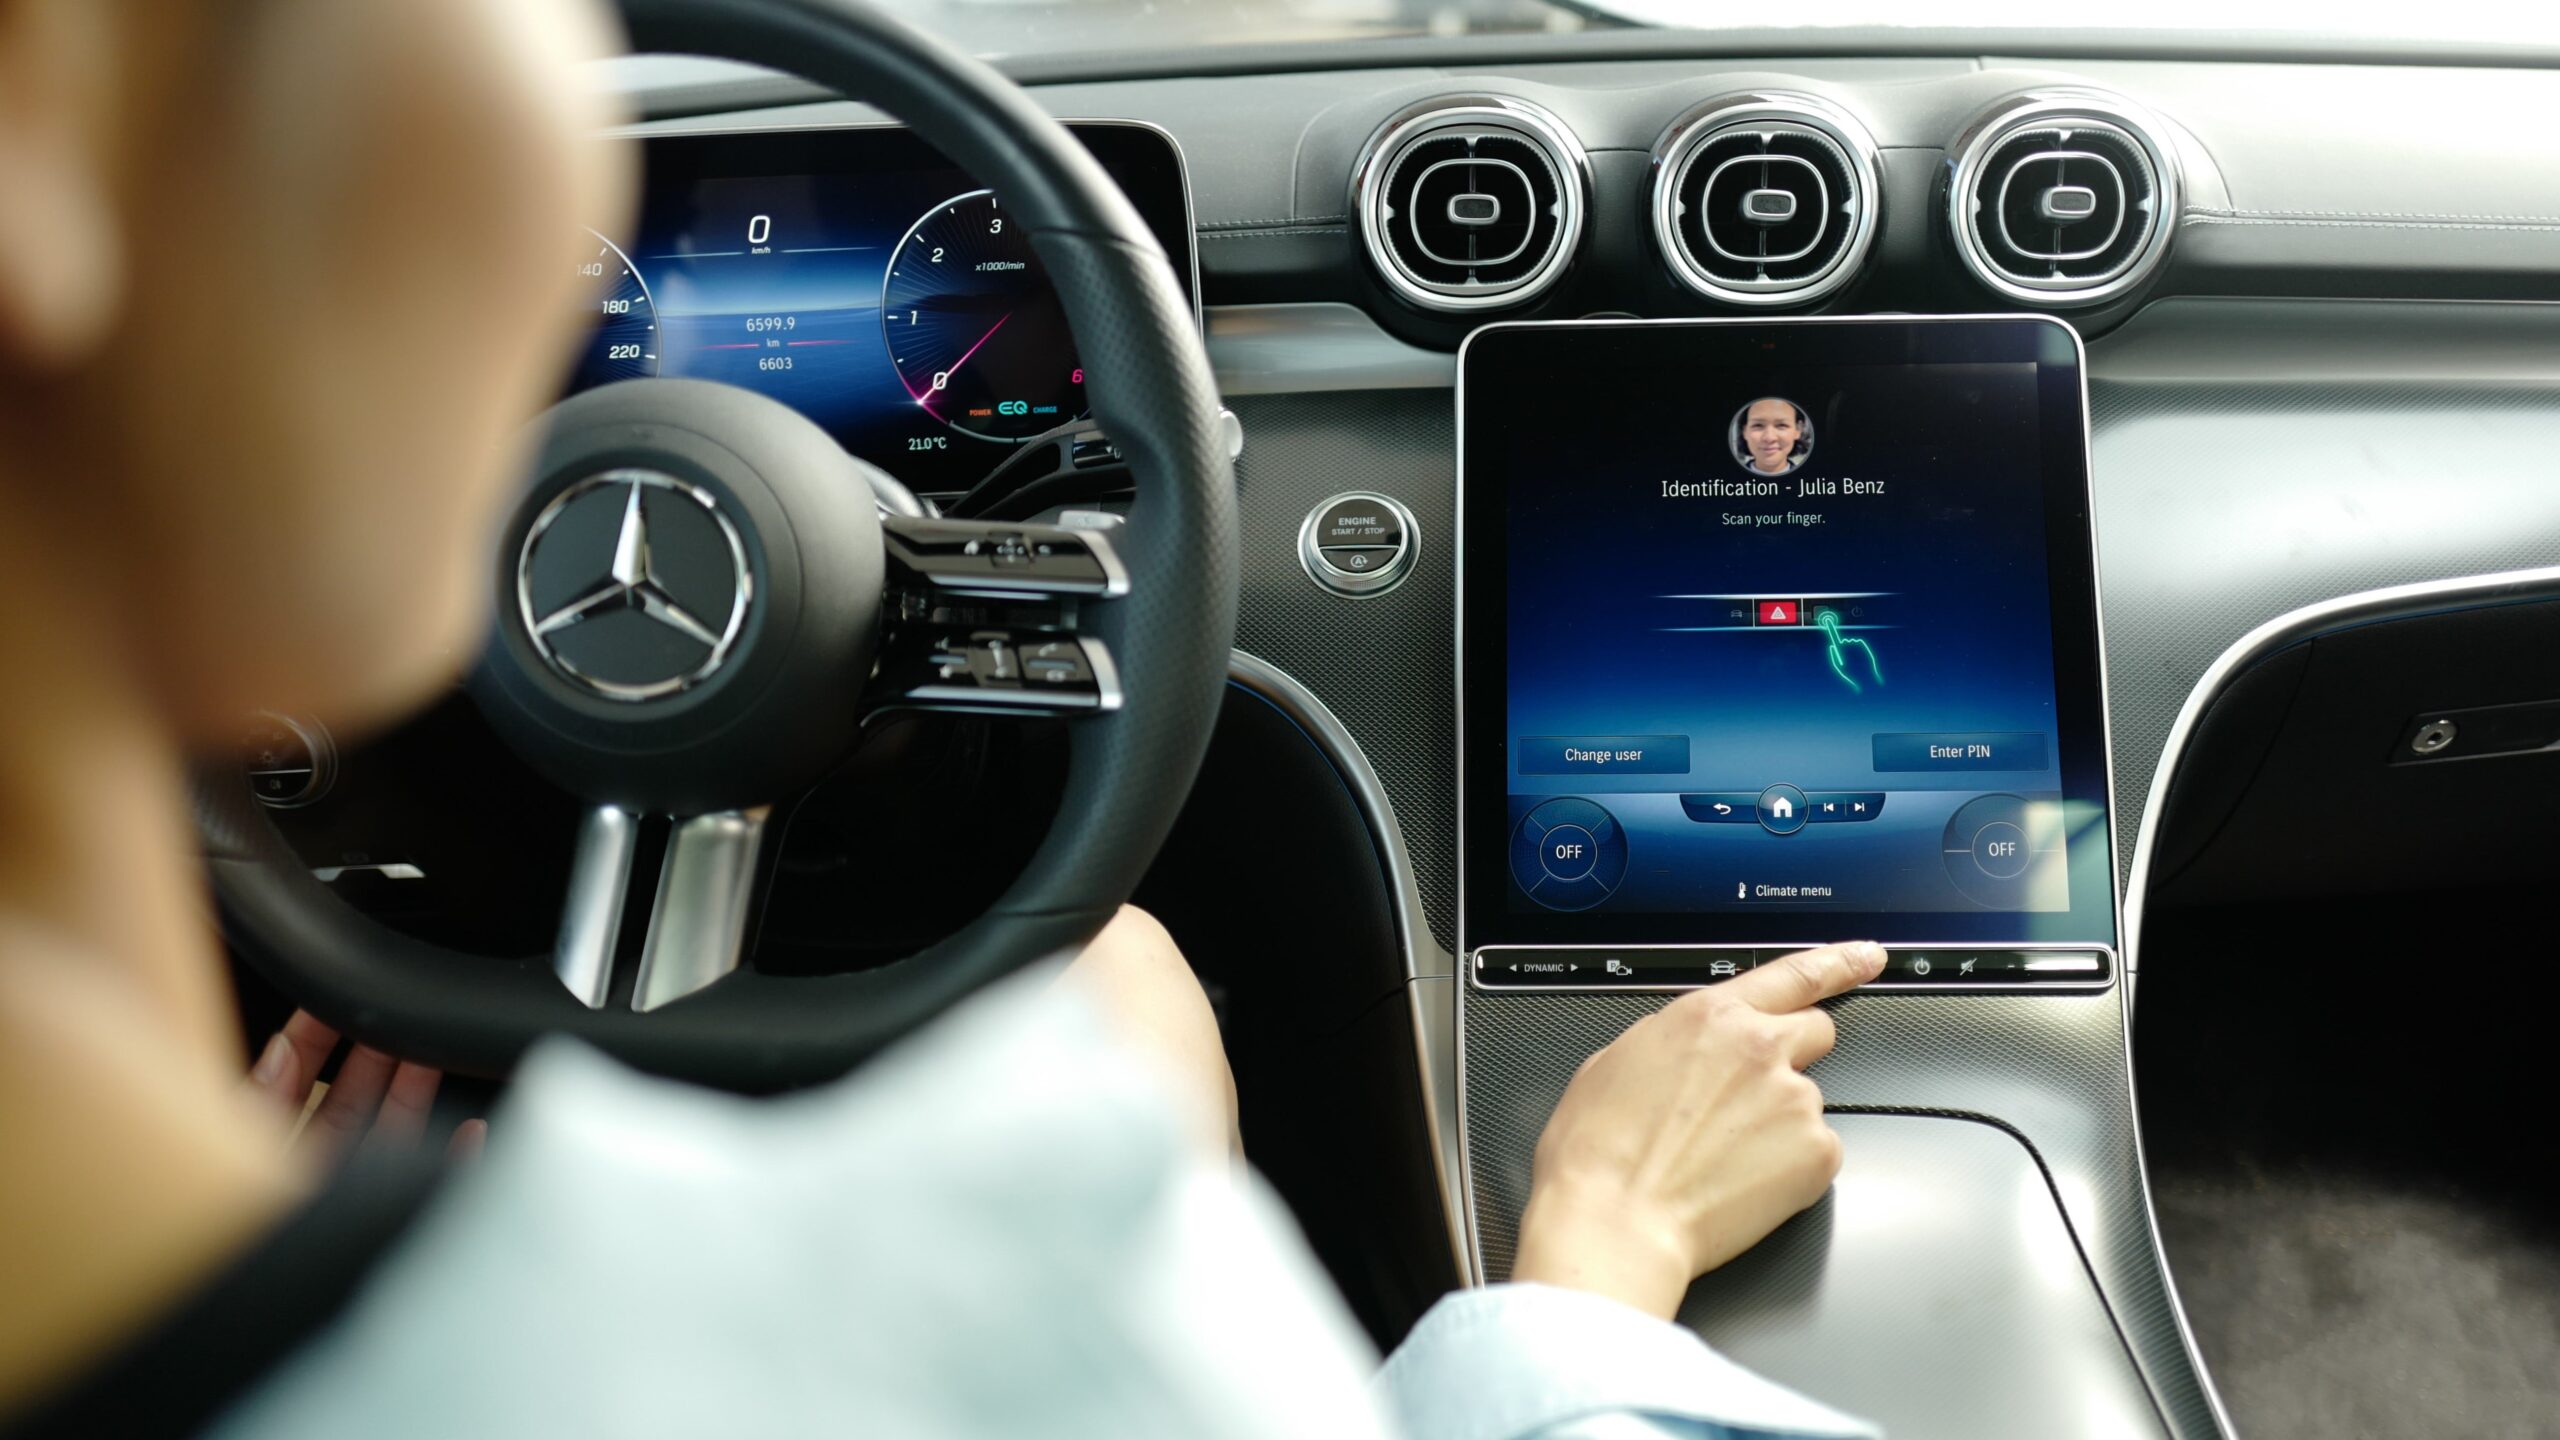 Mercedes-Benz, Mastercard collaborate to roll out embedded in-car payments at pump